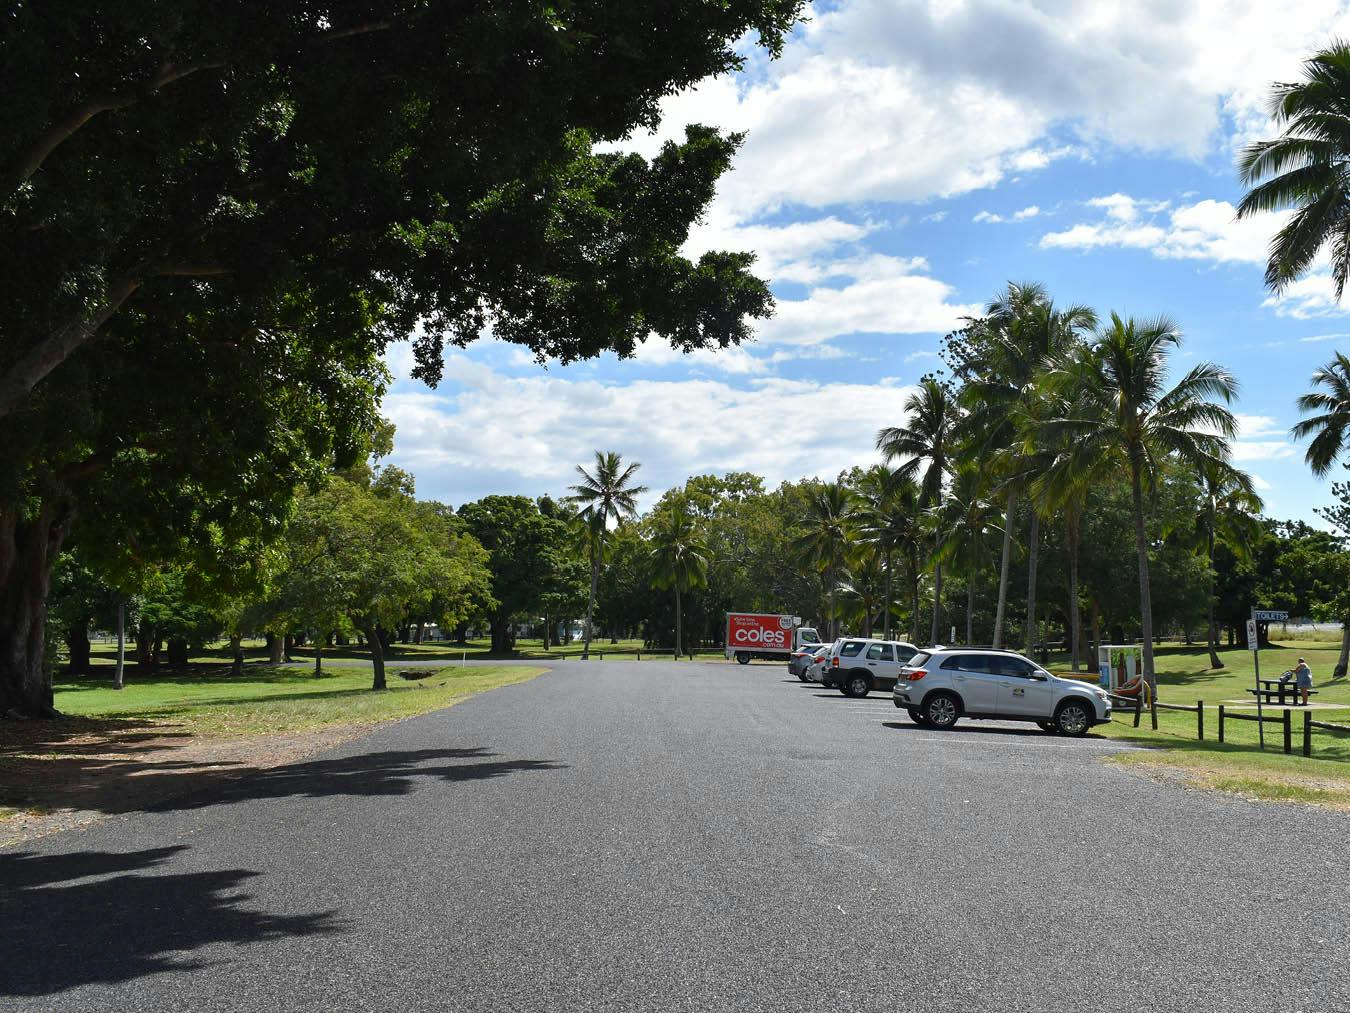 Intersection 3 - The photograph is looking west along the centre line of Seaforth Esplanade Road. The car parking in this location services the swimming enclosure and picnic area.